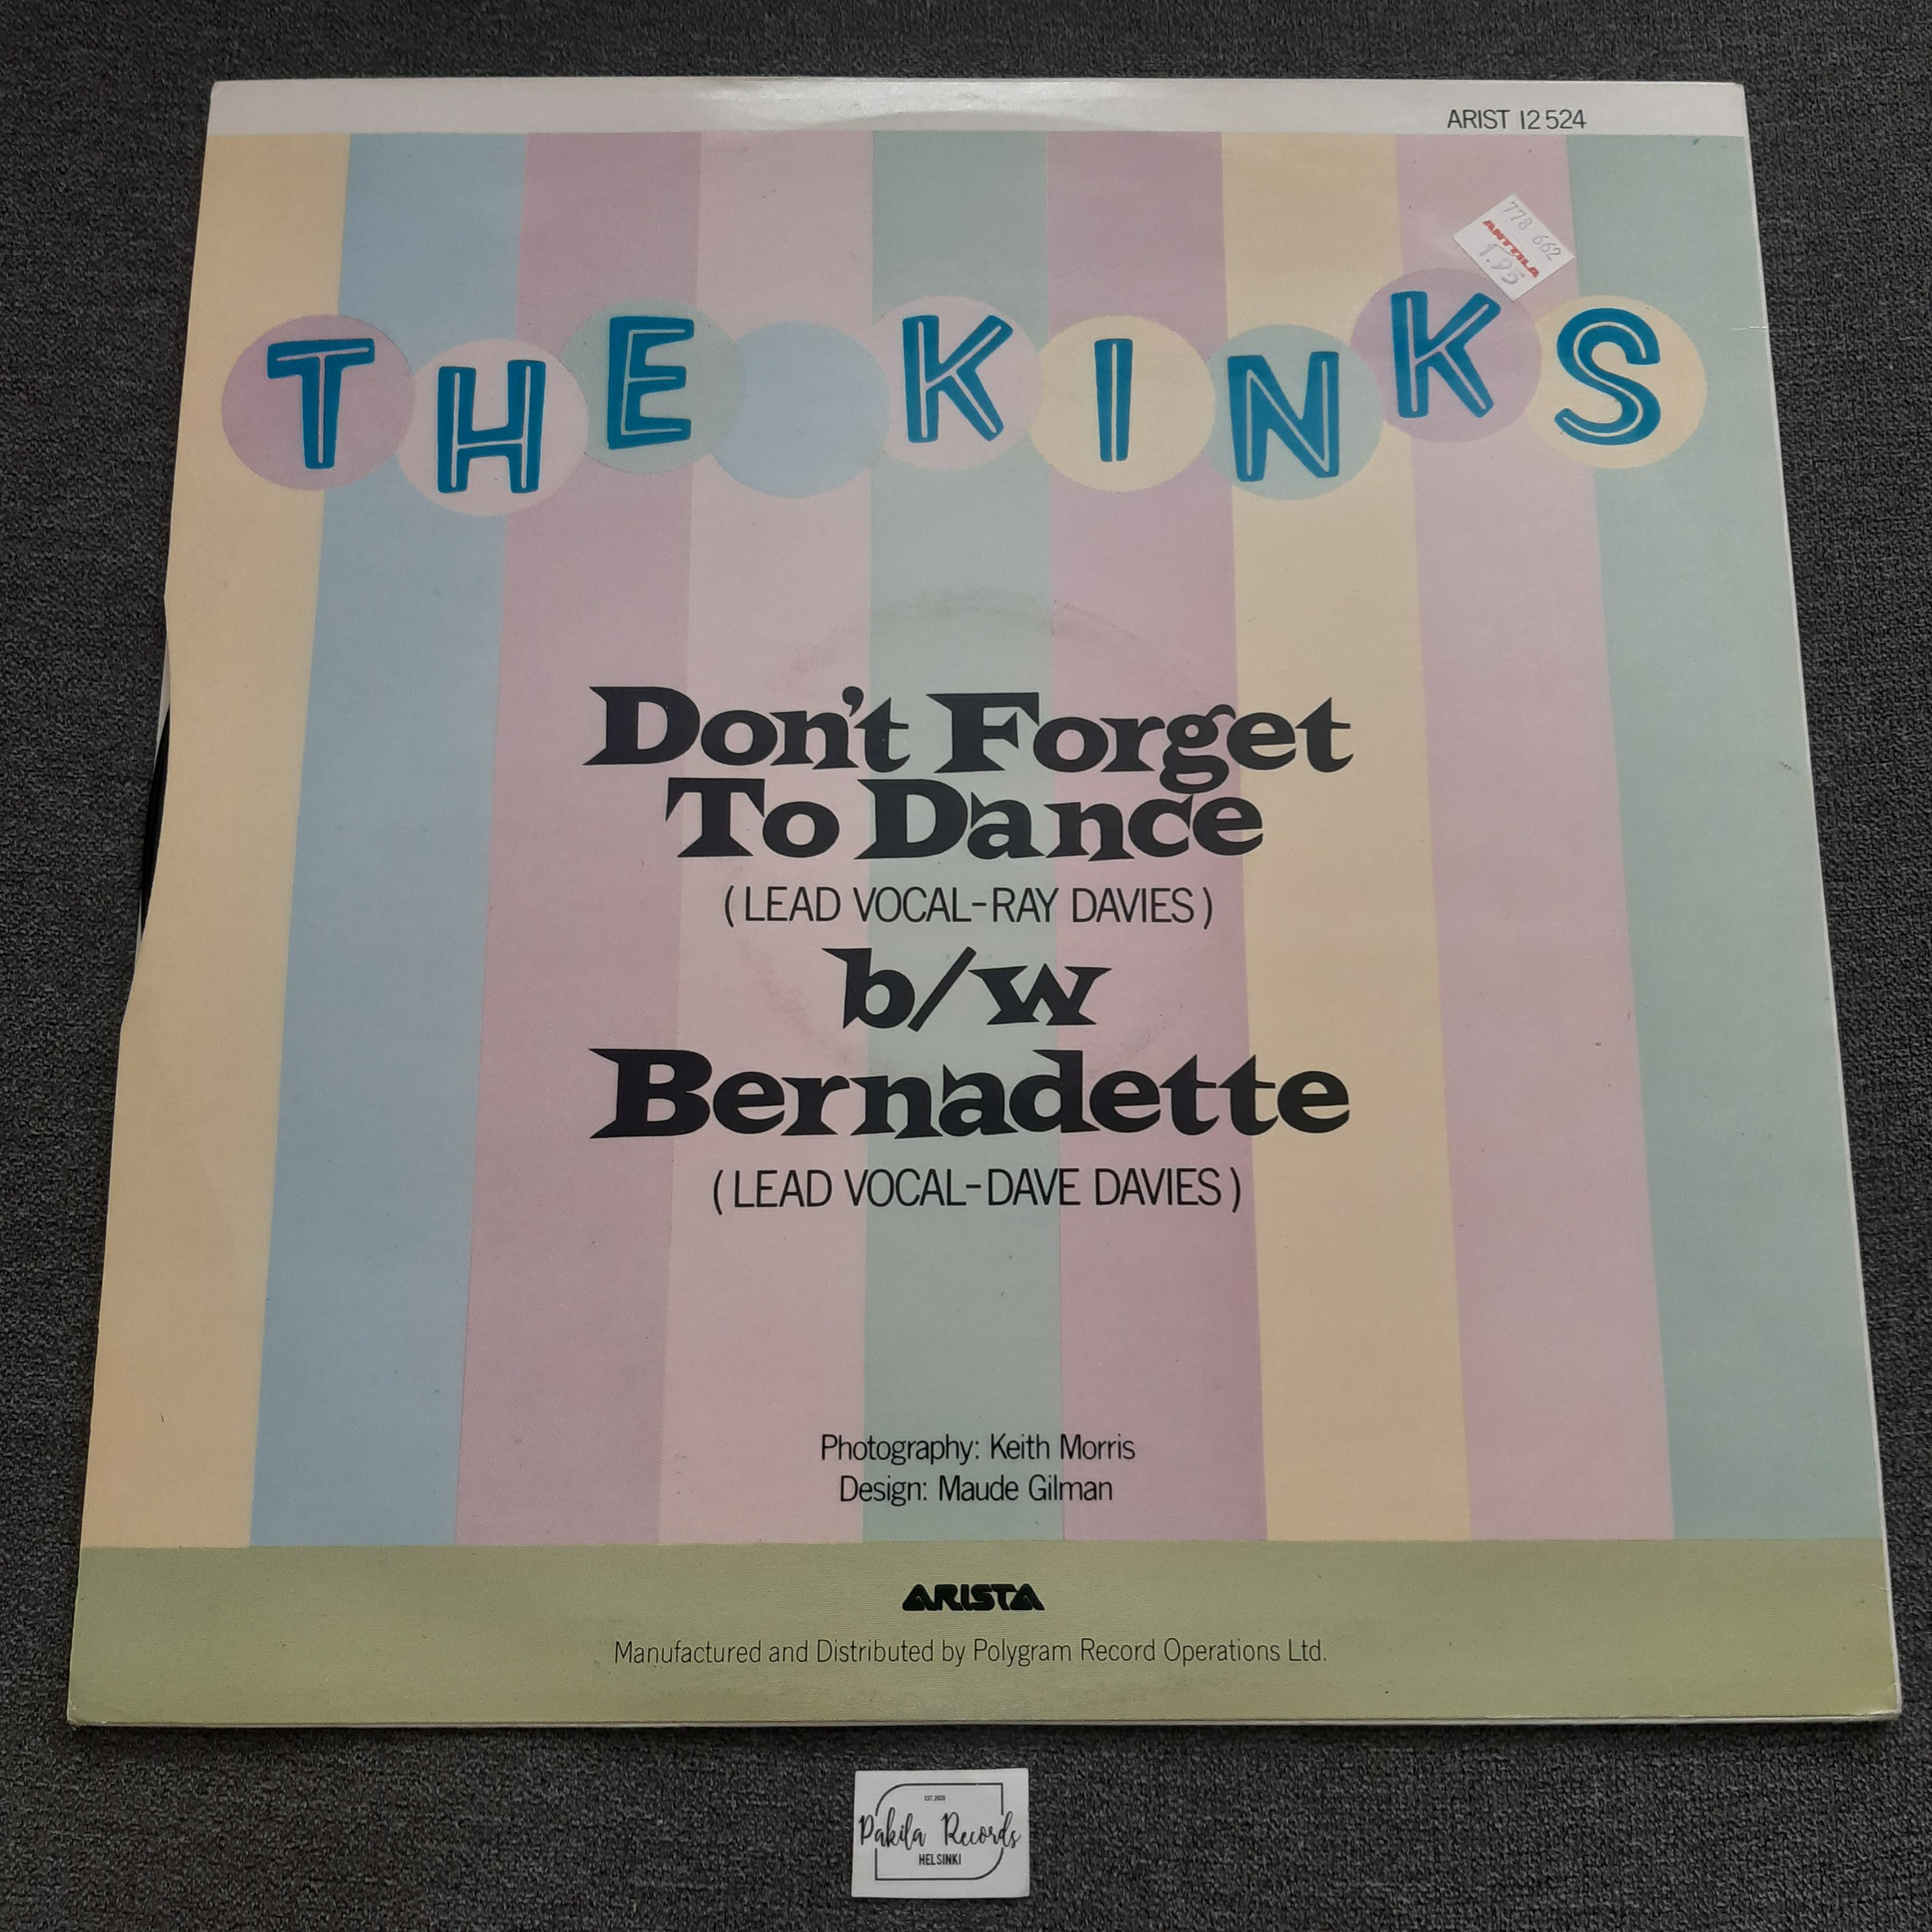 The Kinks - Don't Forget To Dance - Single 12" (käytetty)